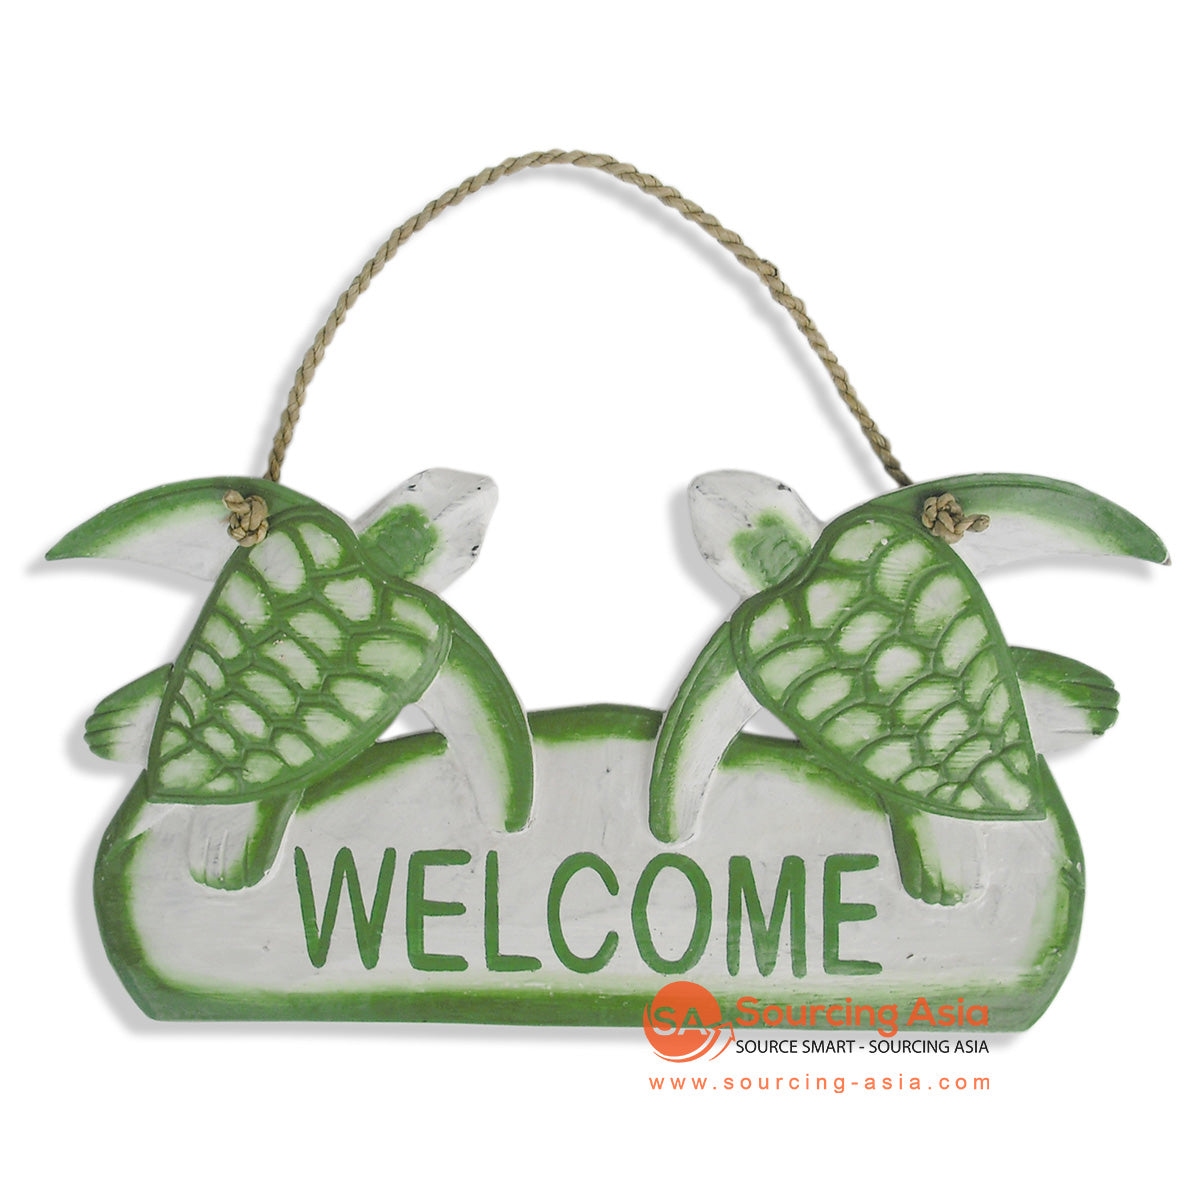 MDC56-6 DECORATIVE SIGN "WELCOME" WITH TWO TURTLES